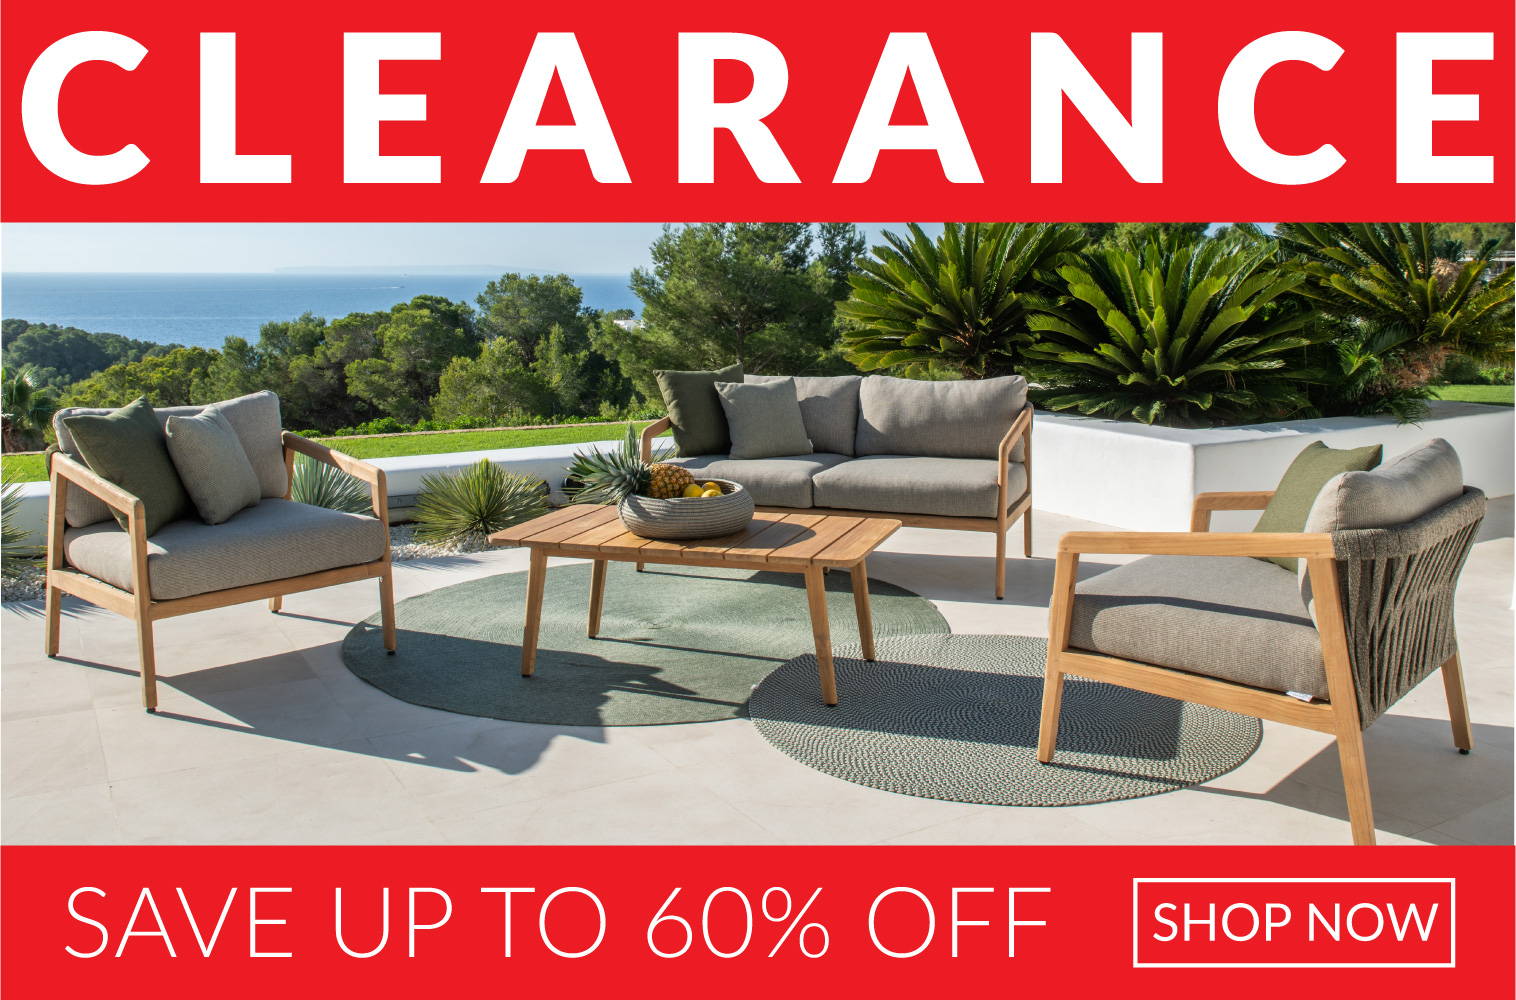 Clearance Sale Ritz Teak Outdoor Seating Save up to 60% off